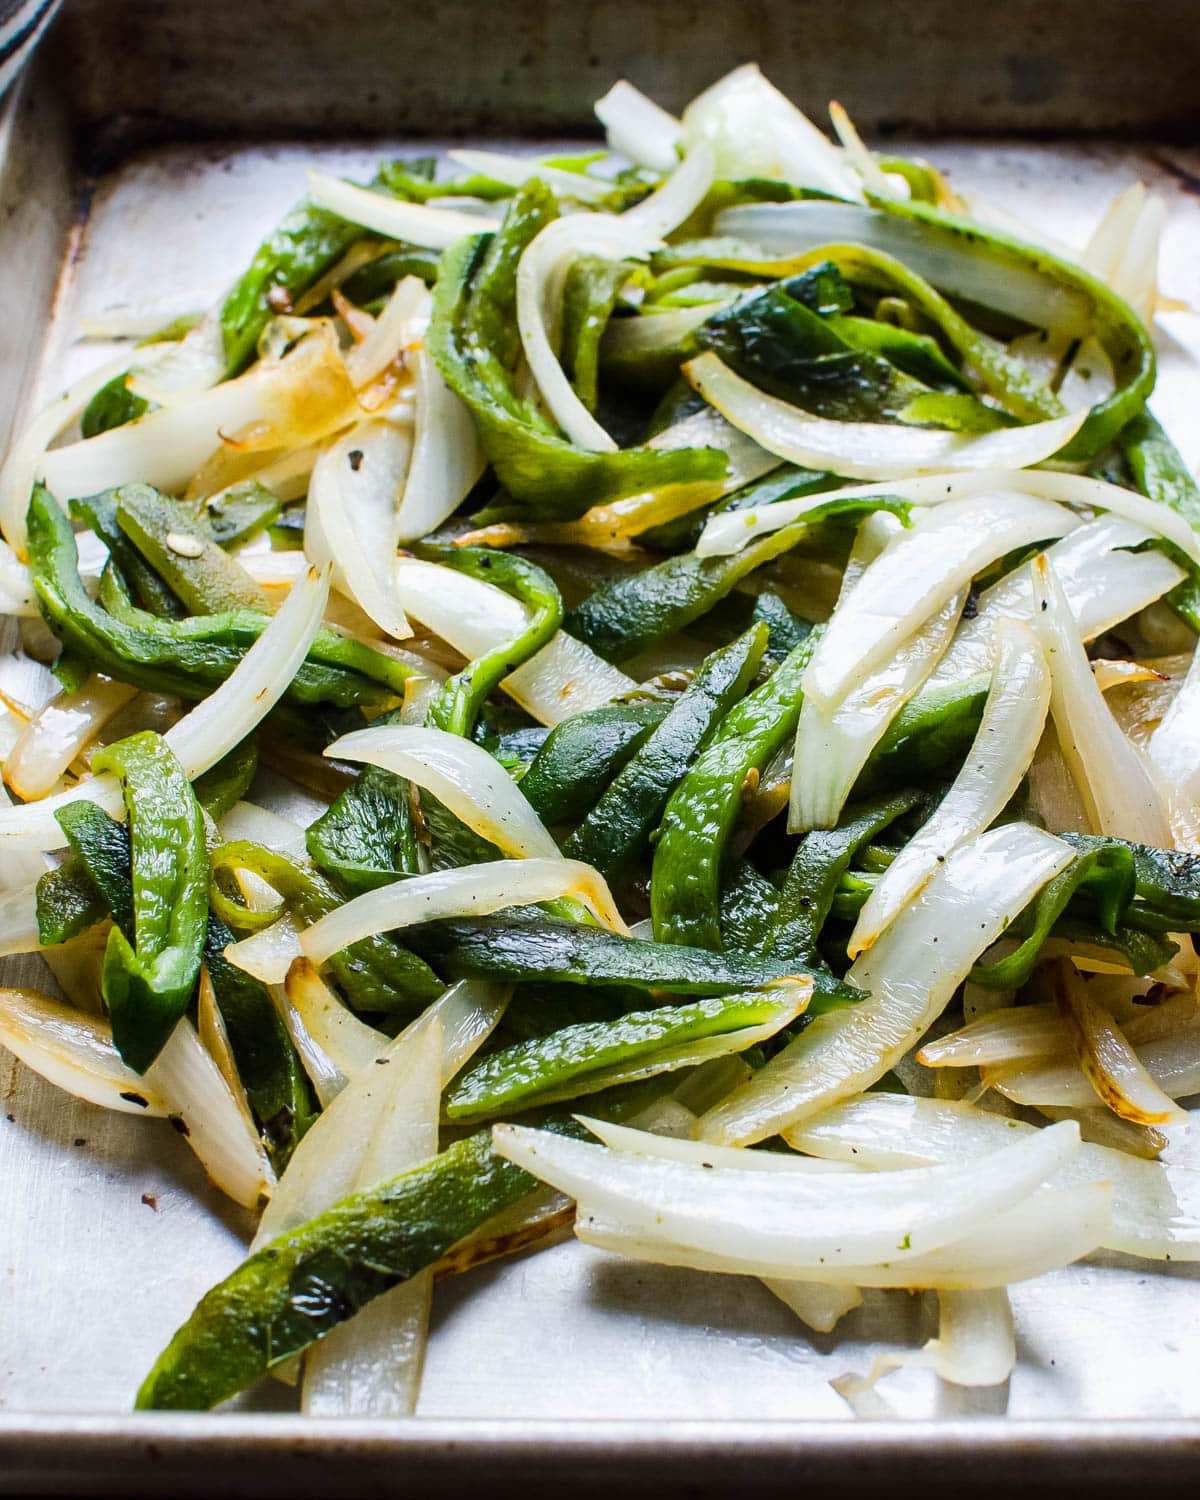 Fire roasted poblano peppers and white onions on a baking sheet.